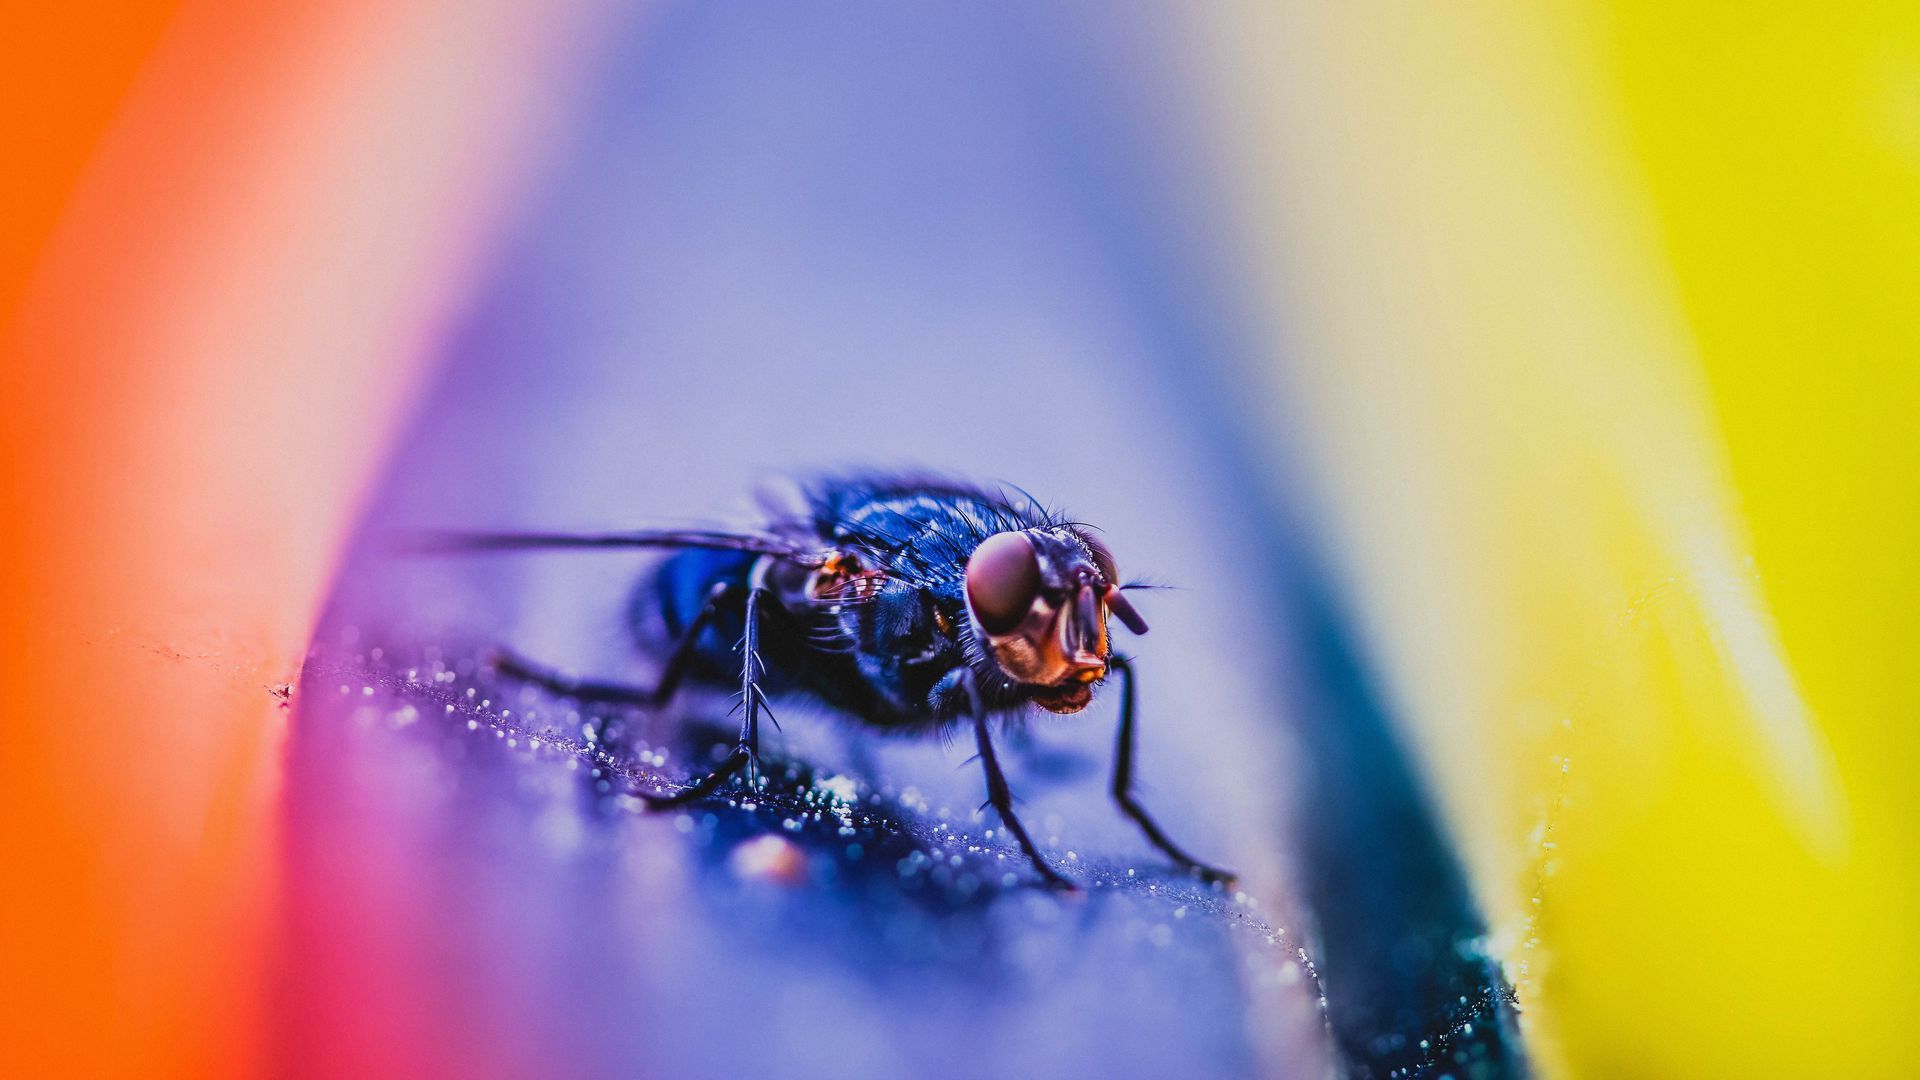 Download wallpaper 1920x1080 fly, insect, macro, close up full HD